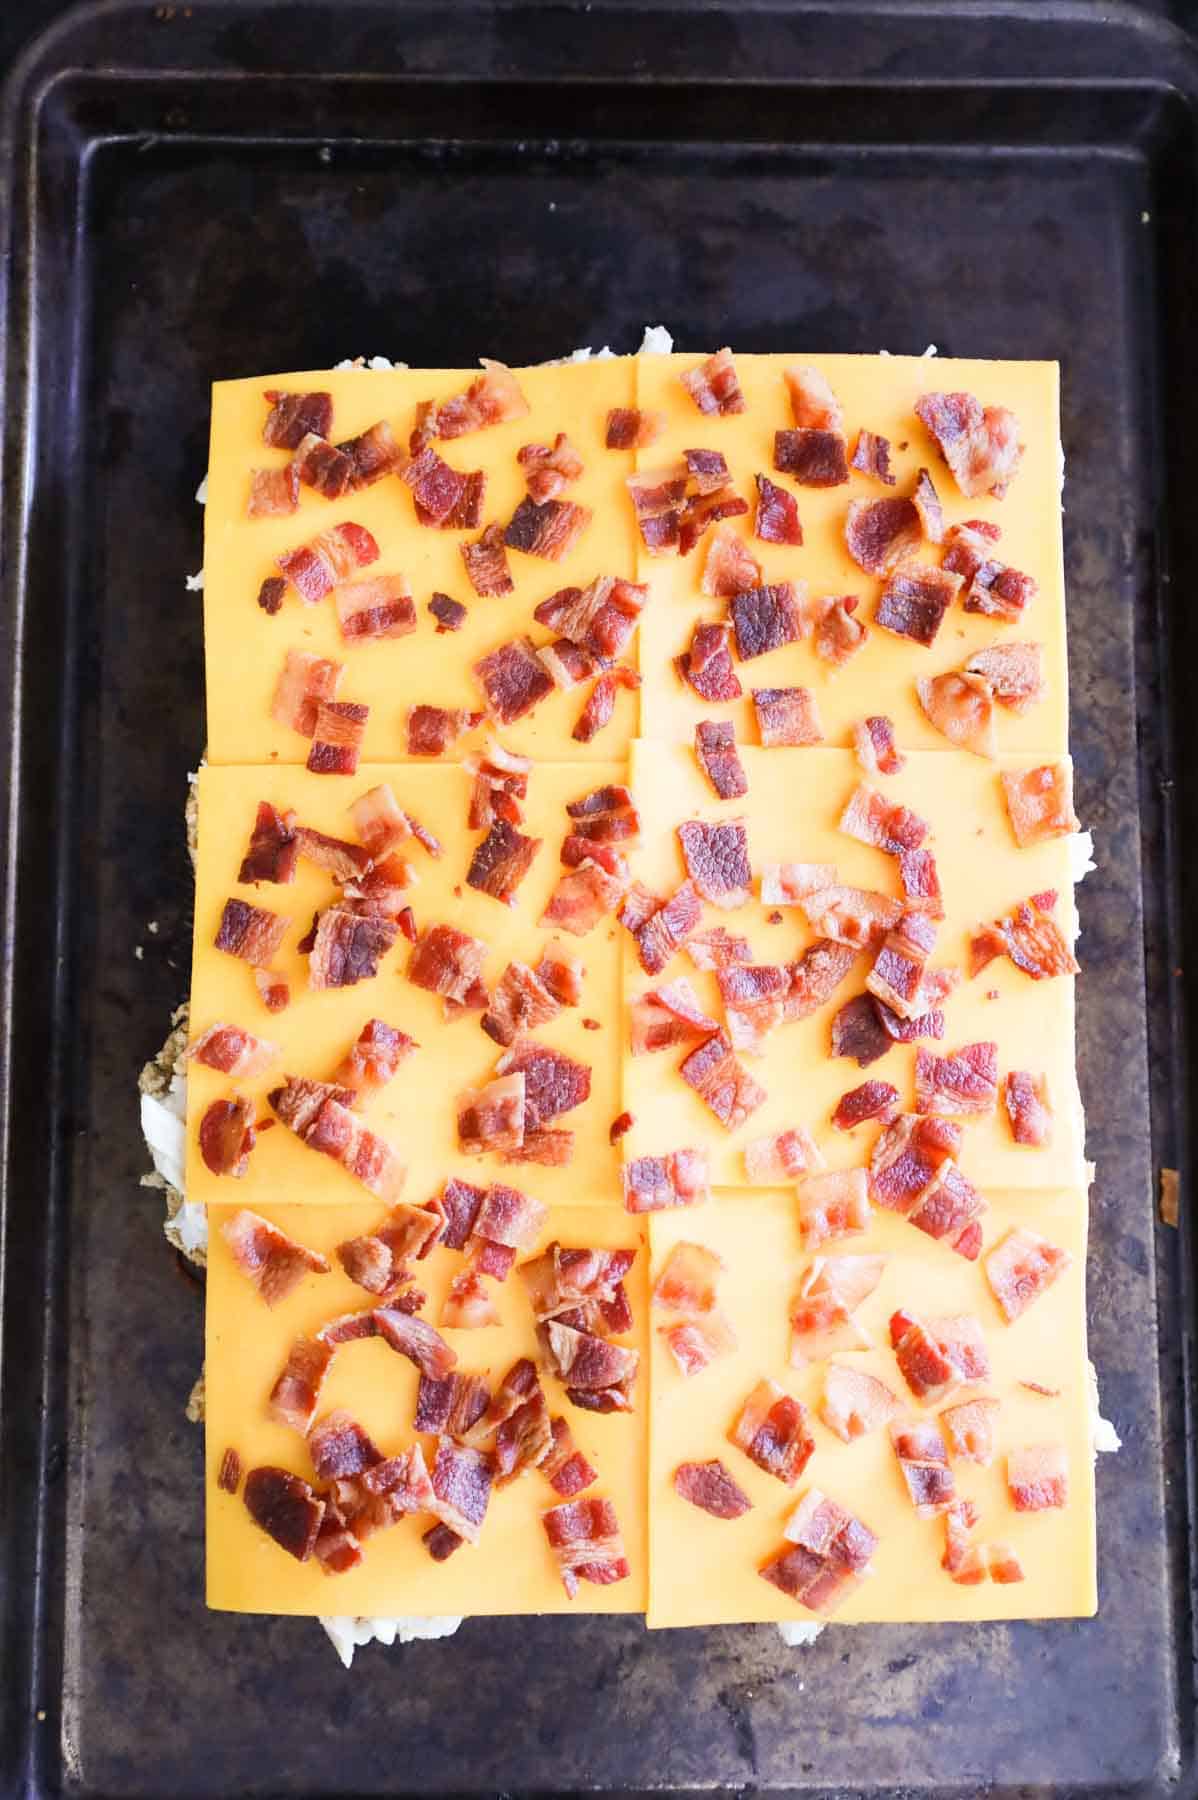 crumbled bacon on top of cheddar cheese slices on slider rolls